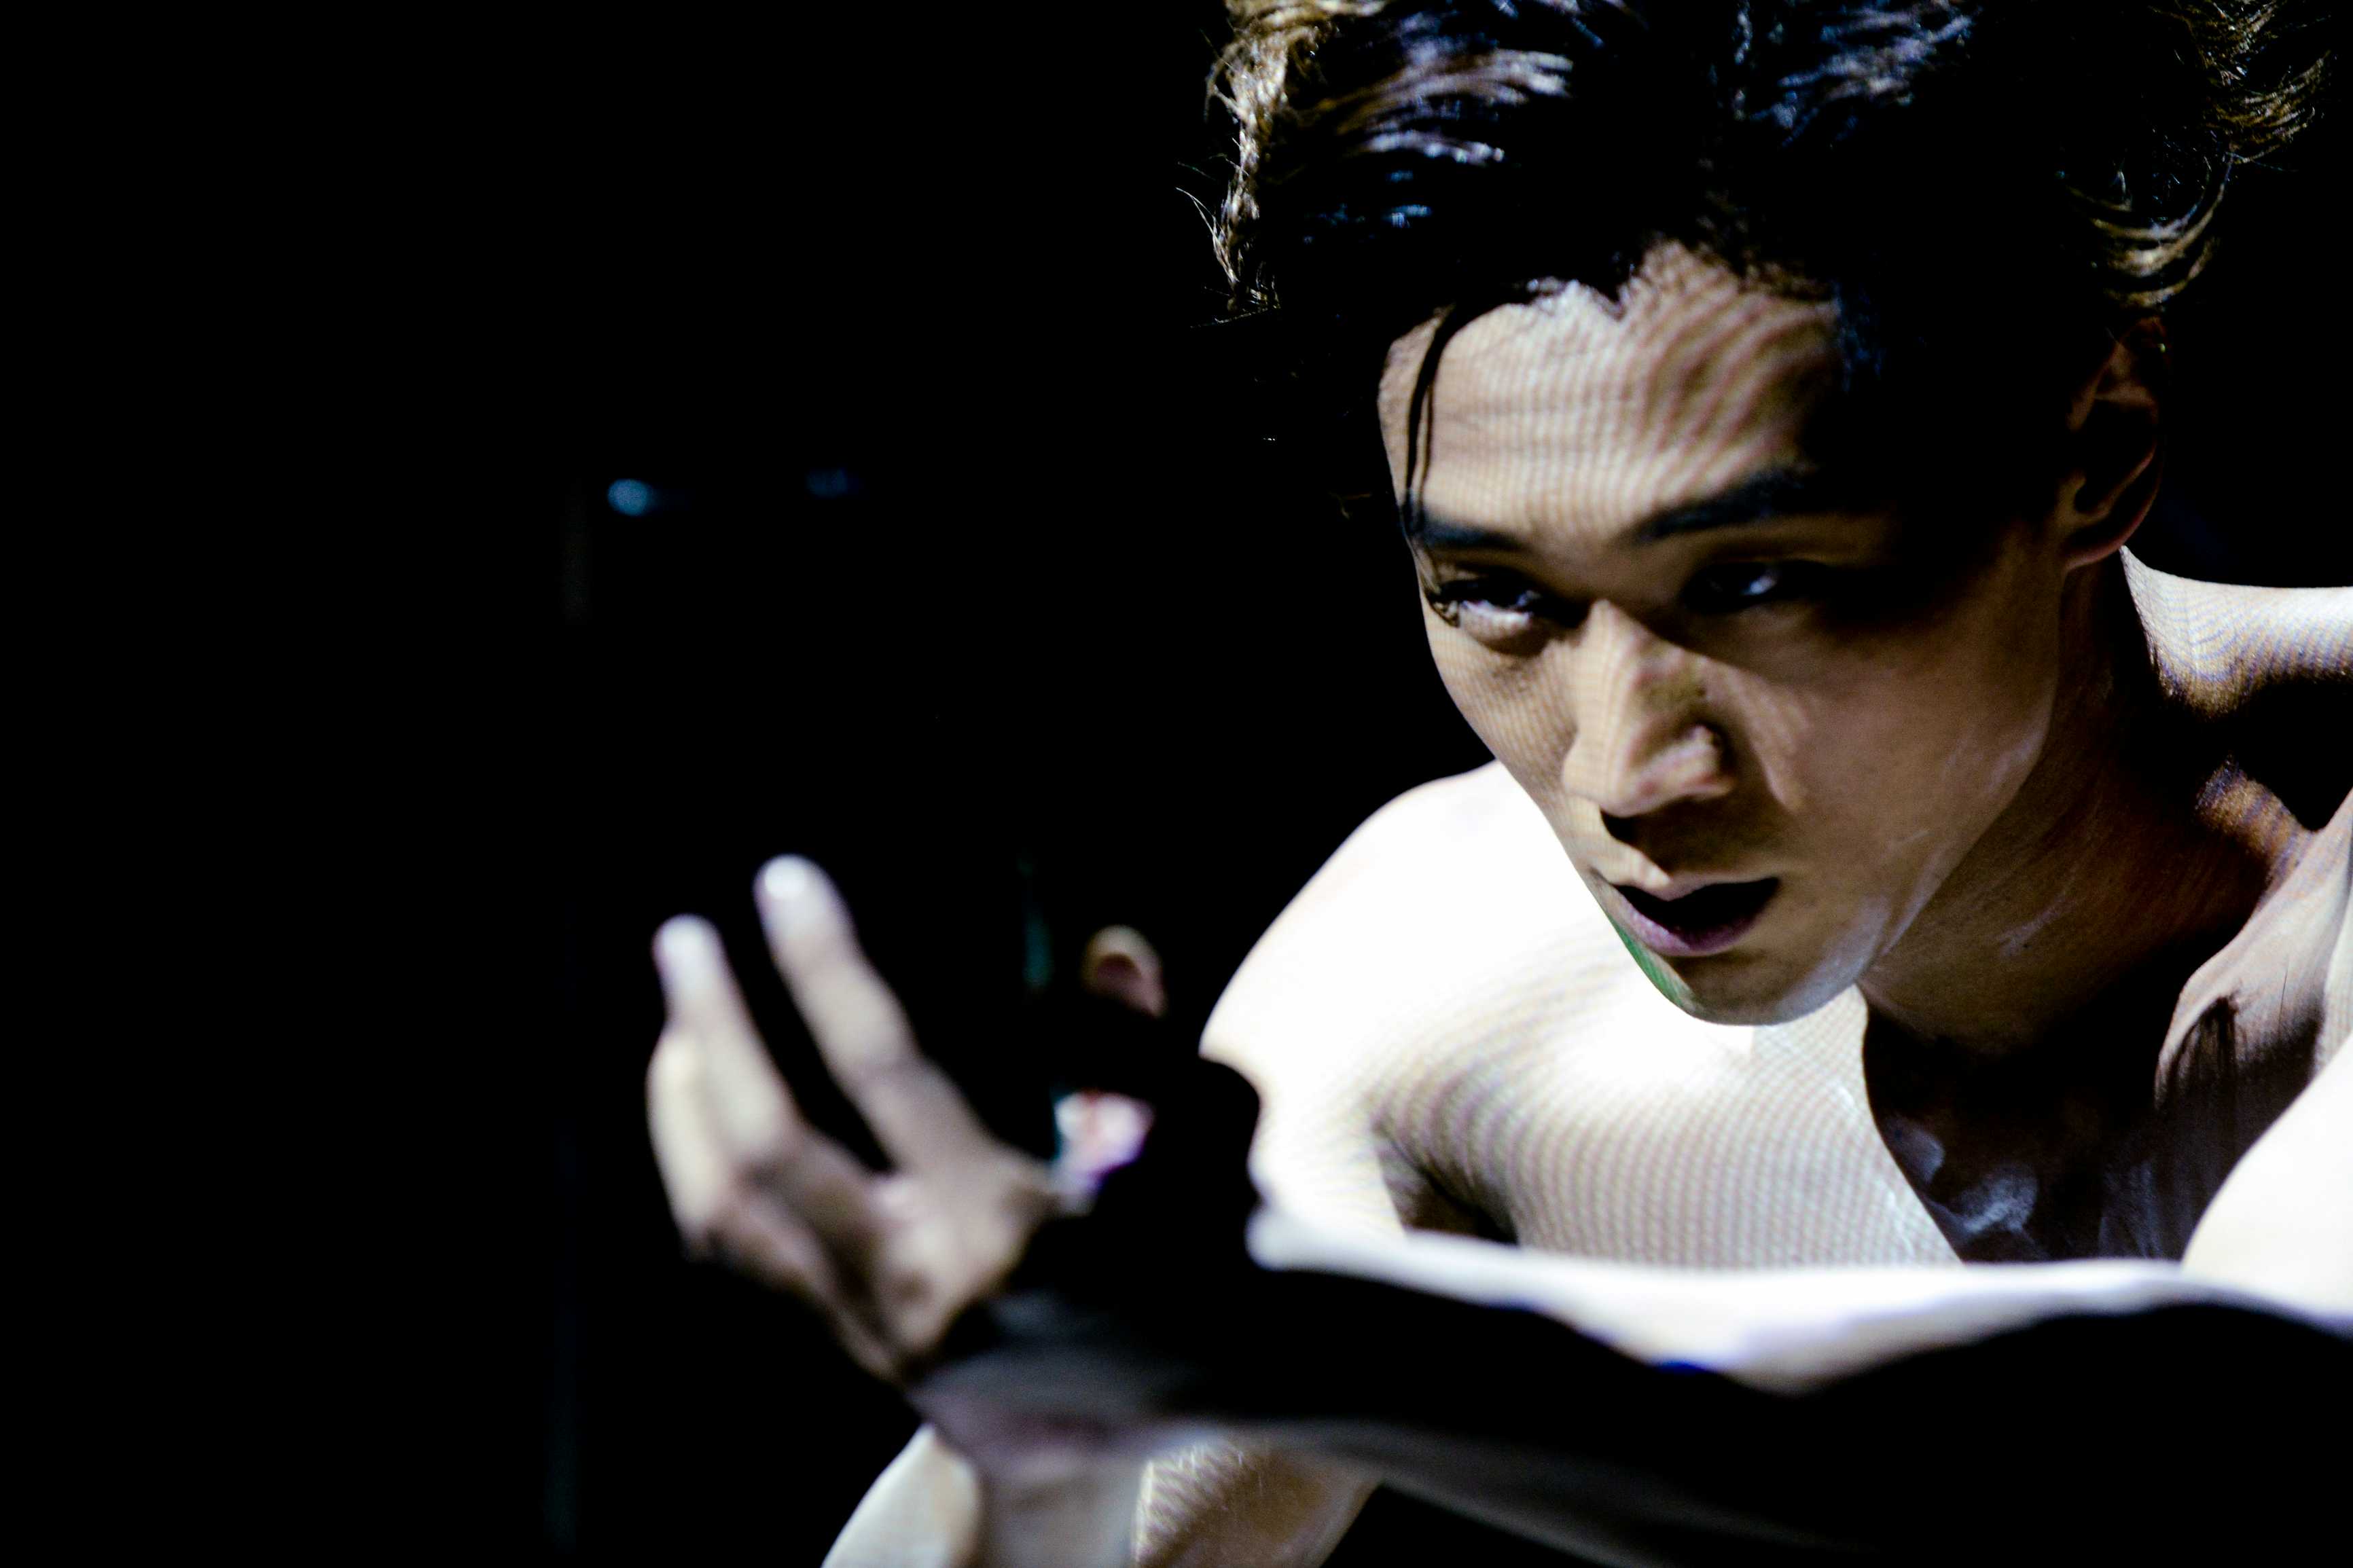 The Beautiful Ones | Featuring: Bon Tong | Tagged as: Show, The Beautiful Ones | Photo: Fung Wai Sun |  (Rooftop Productions • Hong Kong Theatre Company)  | Rooftop Productions • Hong Kong Theatre Company